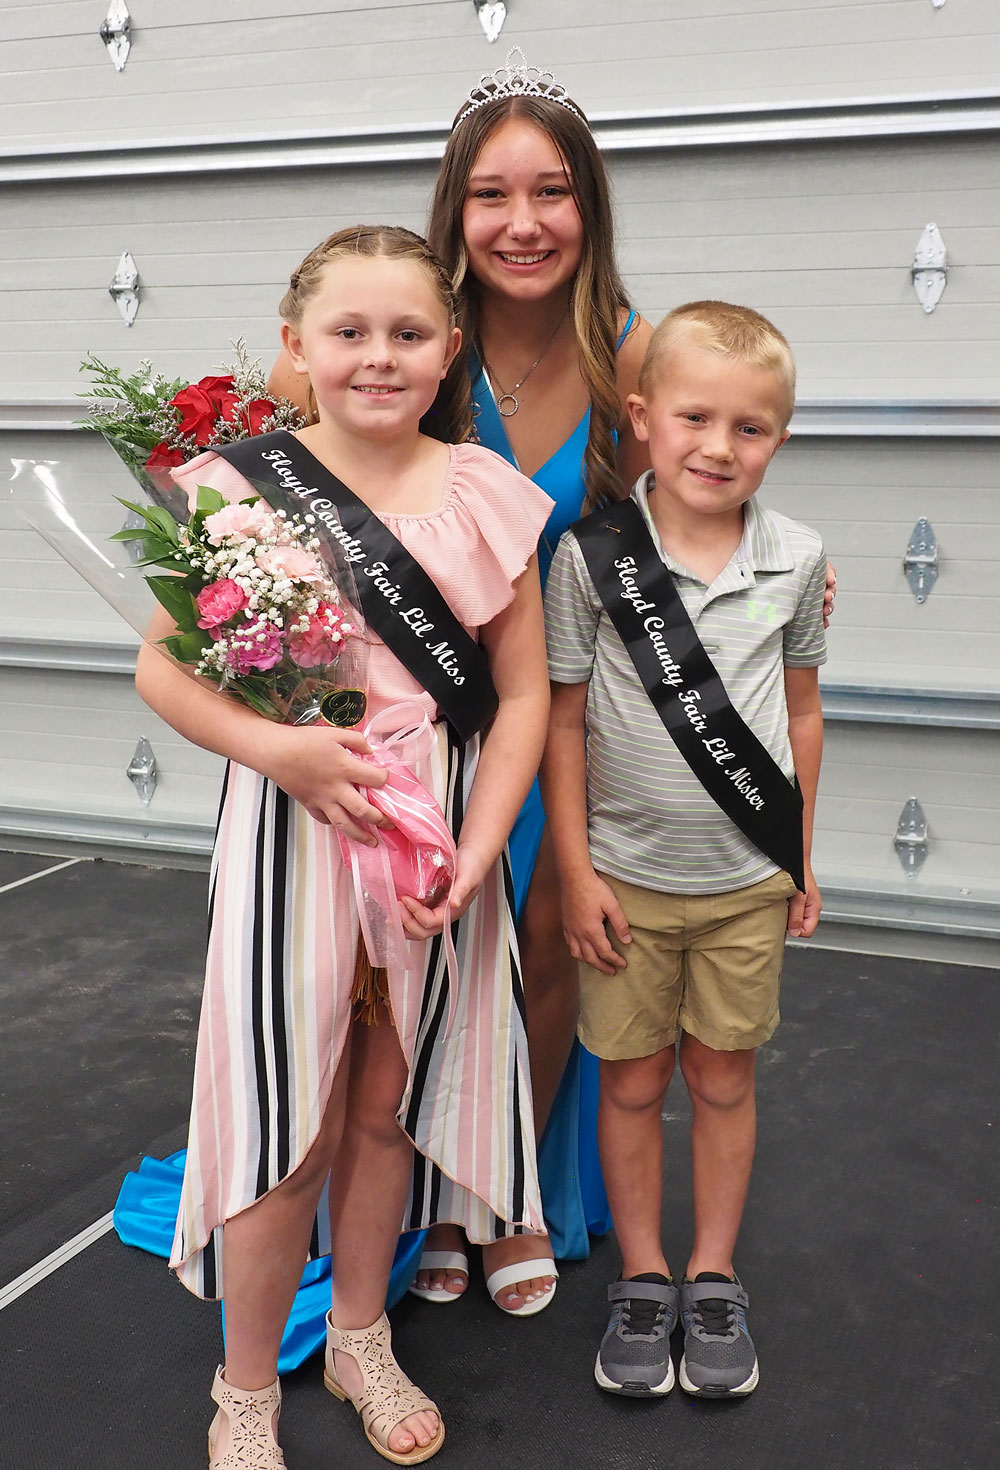 18 little misses and five little misters vie for Floyd County Fair